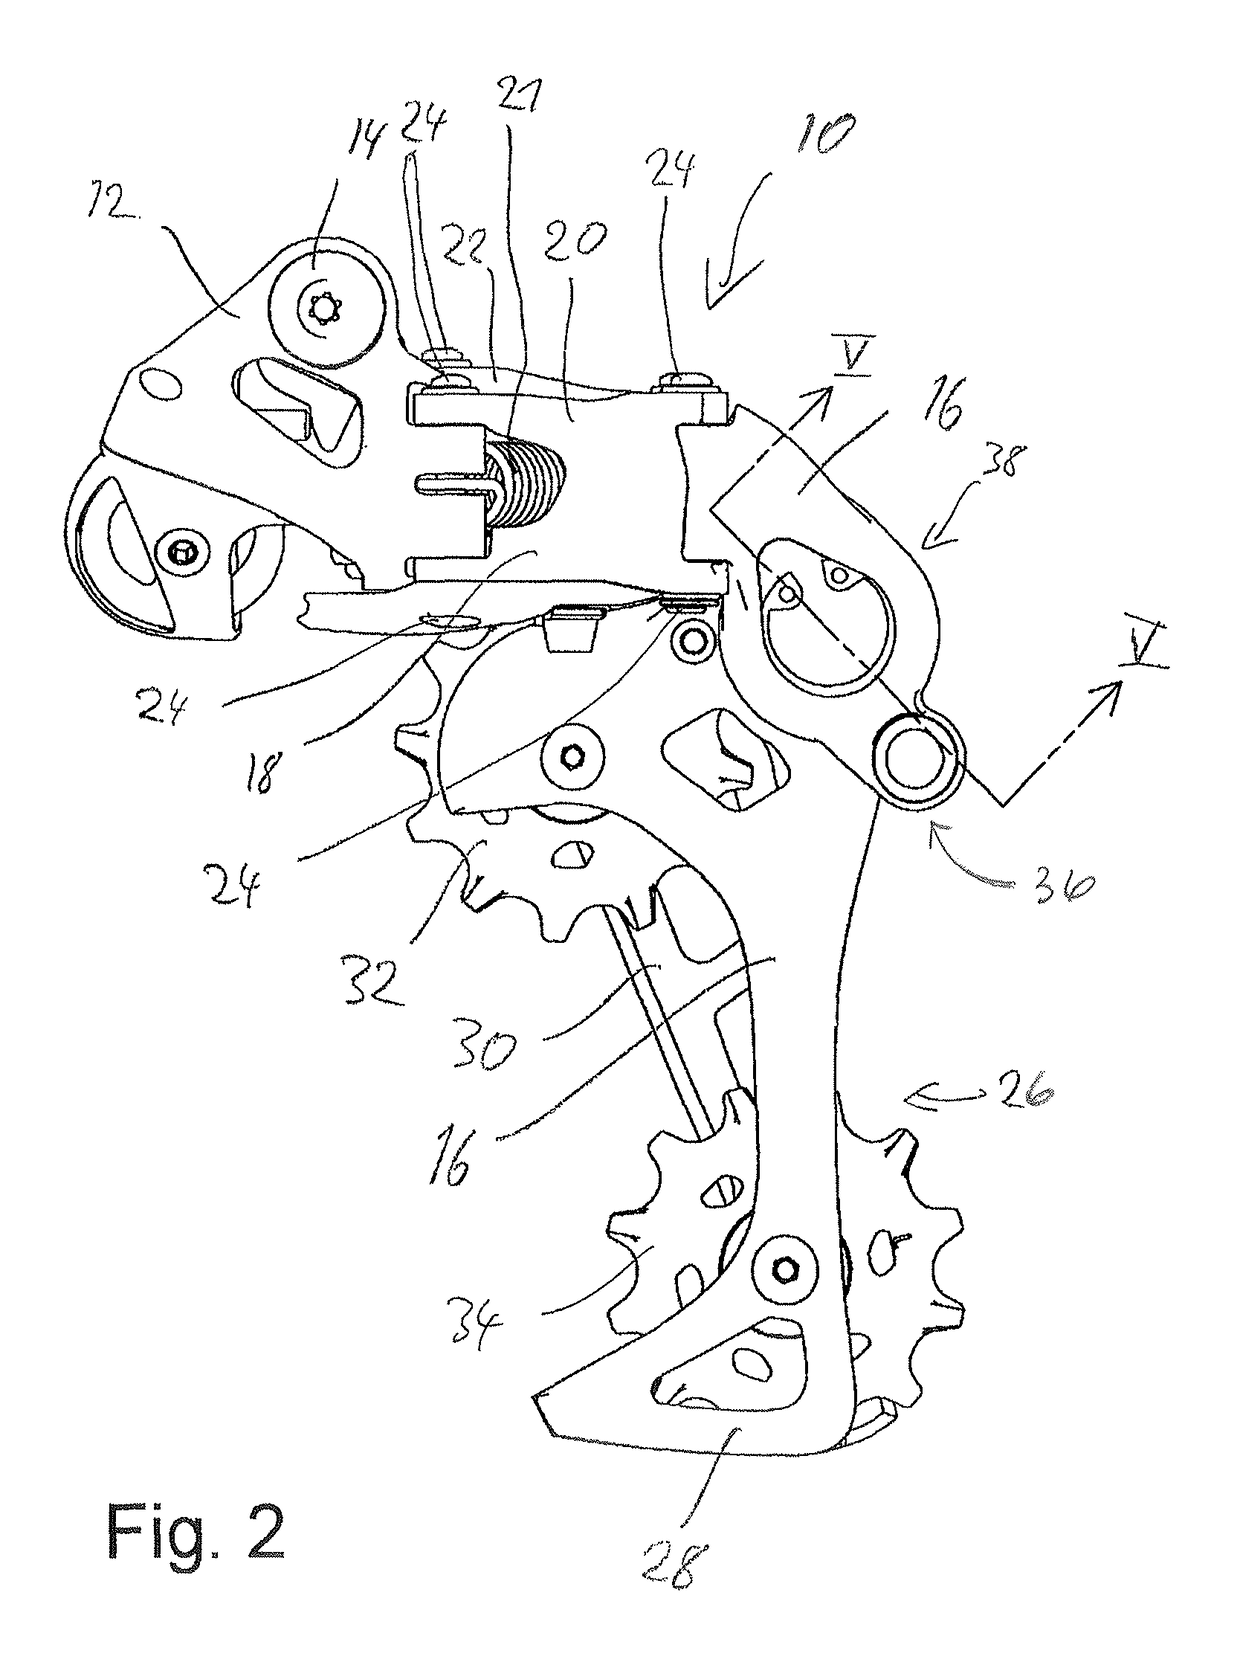 Bicycle rear derailleur with a damper assembly